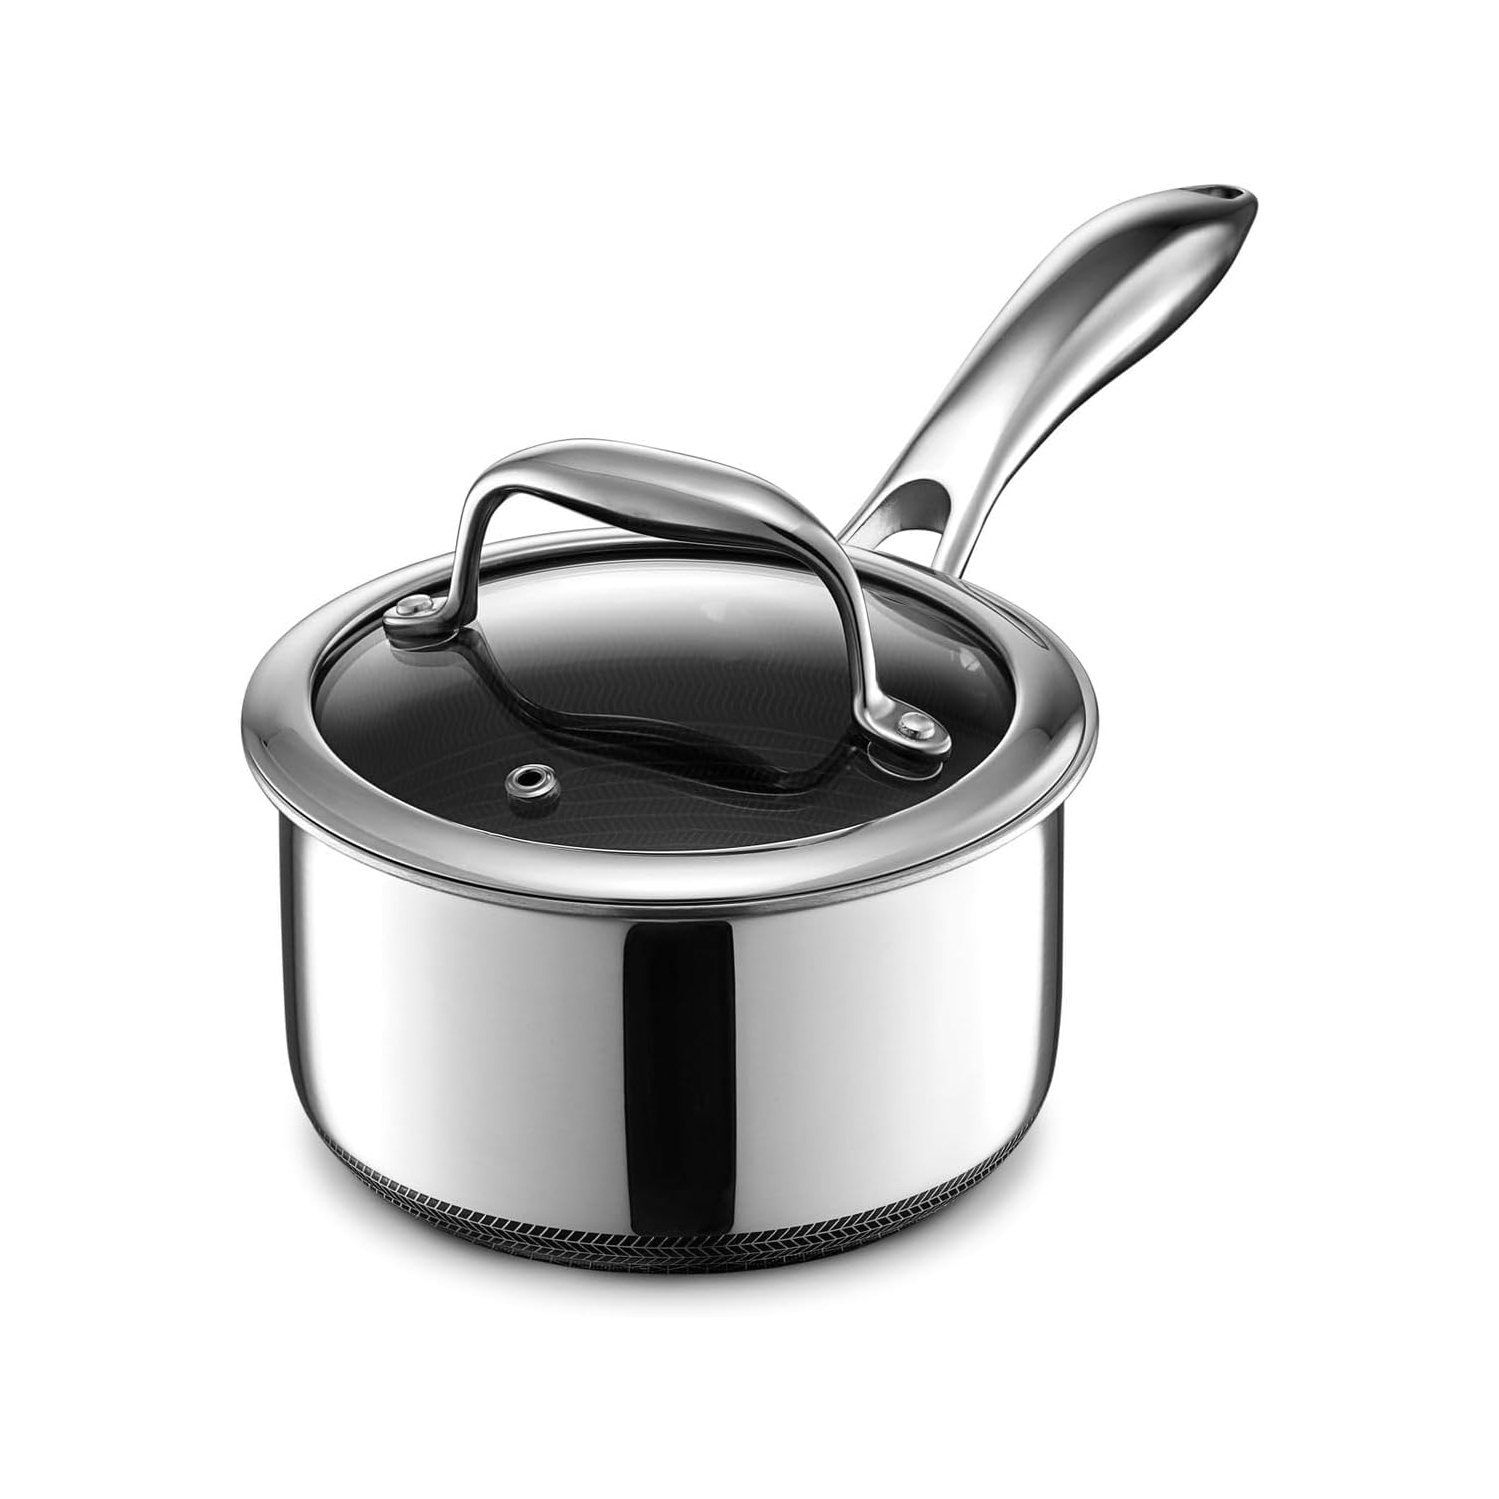 HexClad 1 Quart Hybrid Nonstick Saucepan and Lid, Dishwasher and Oven Friendly, Compatible with All Cooktops